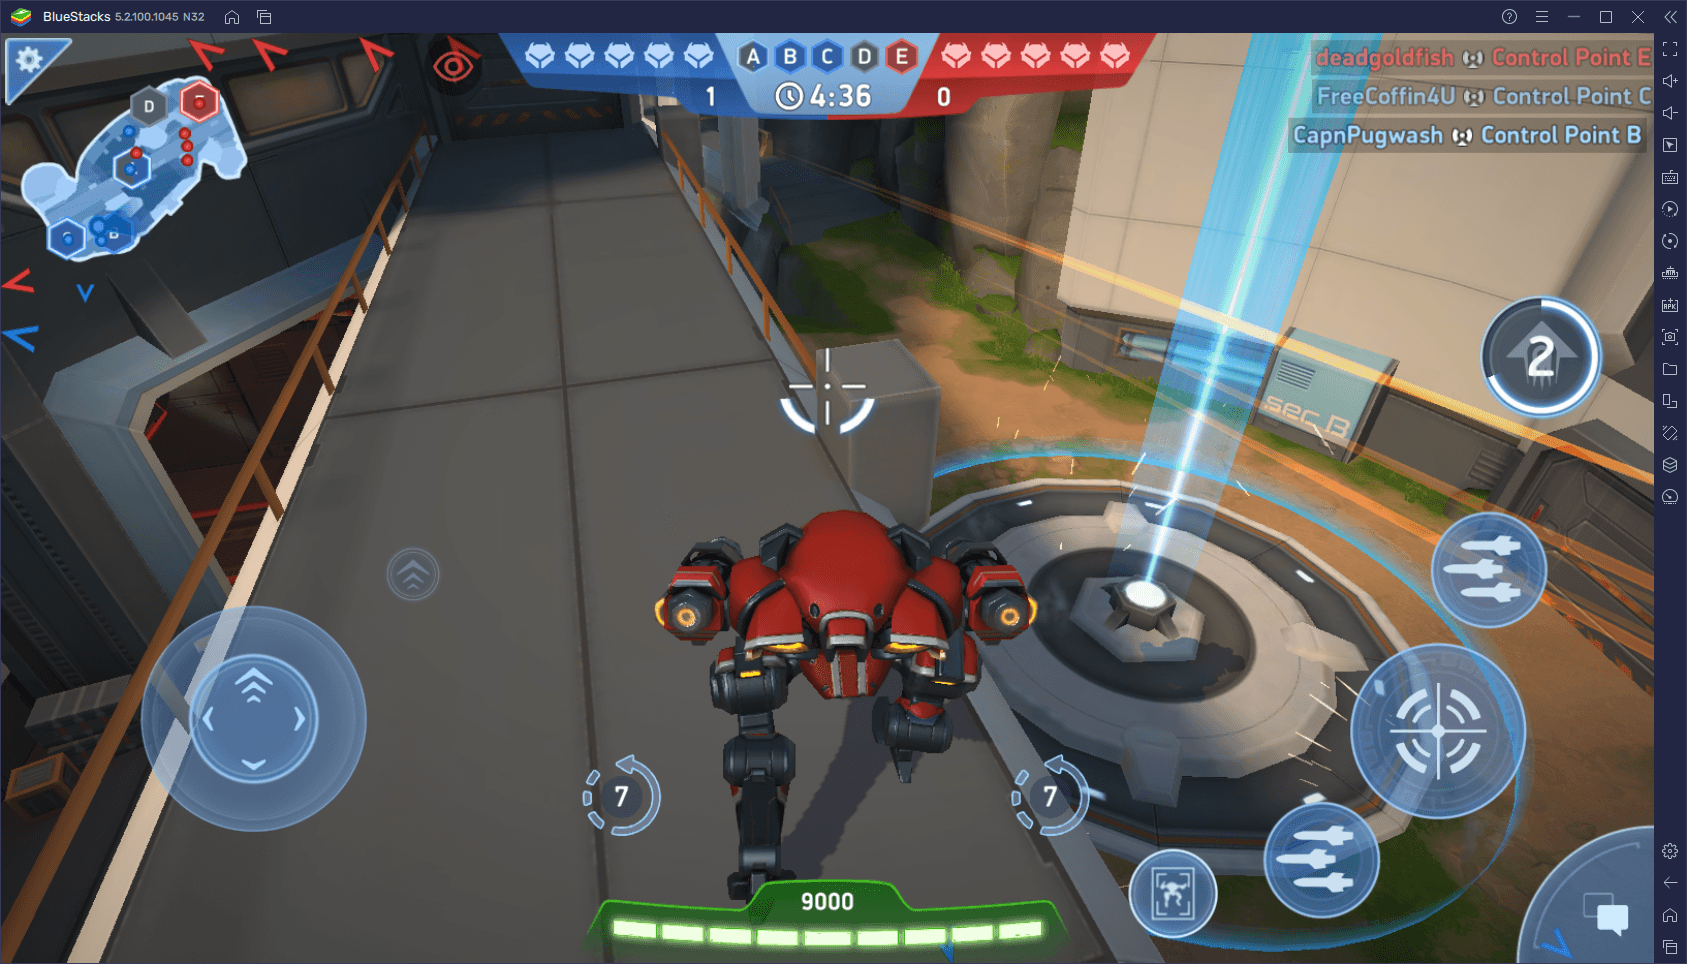 Mech Arena: Robot Showdown Tips and Tricks to Beating Enemies and Winning Matches